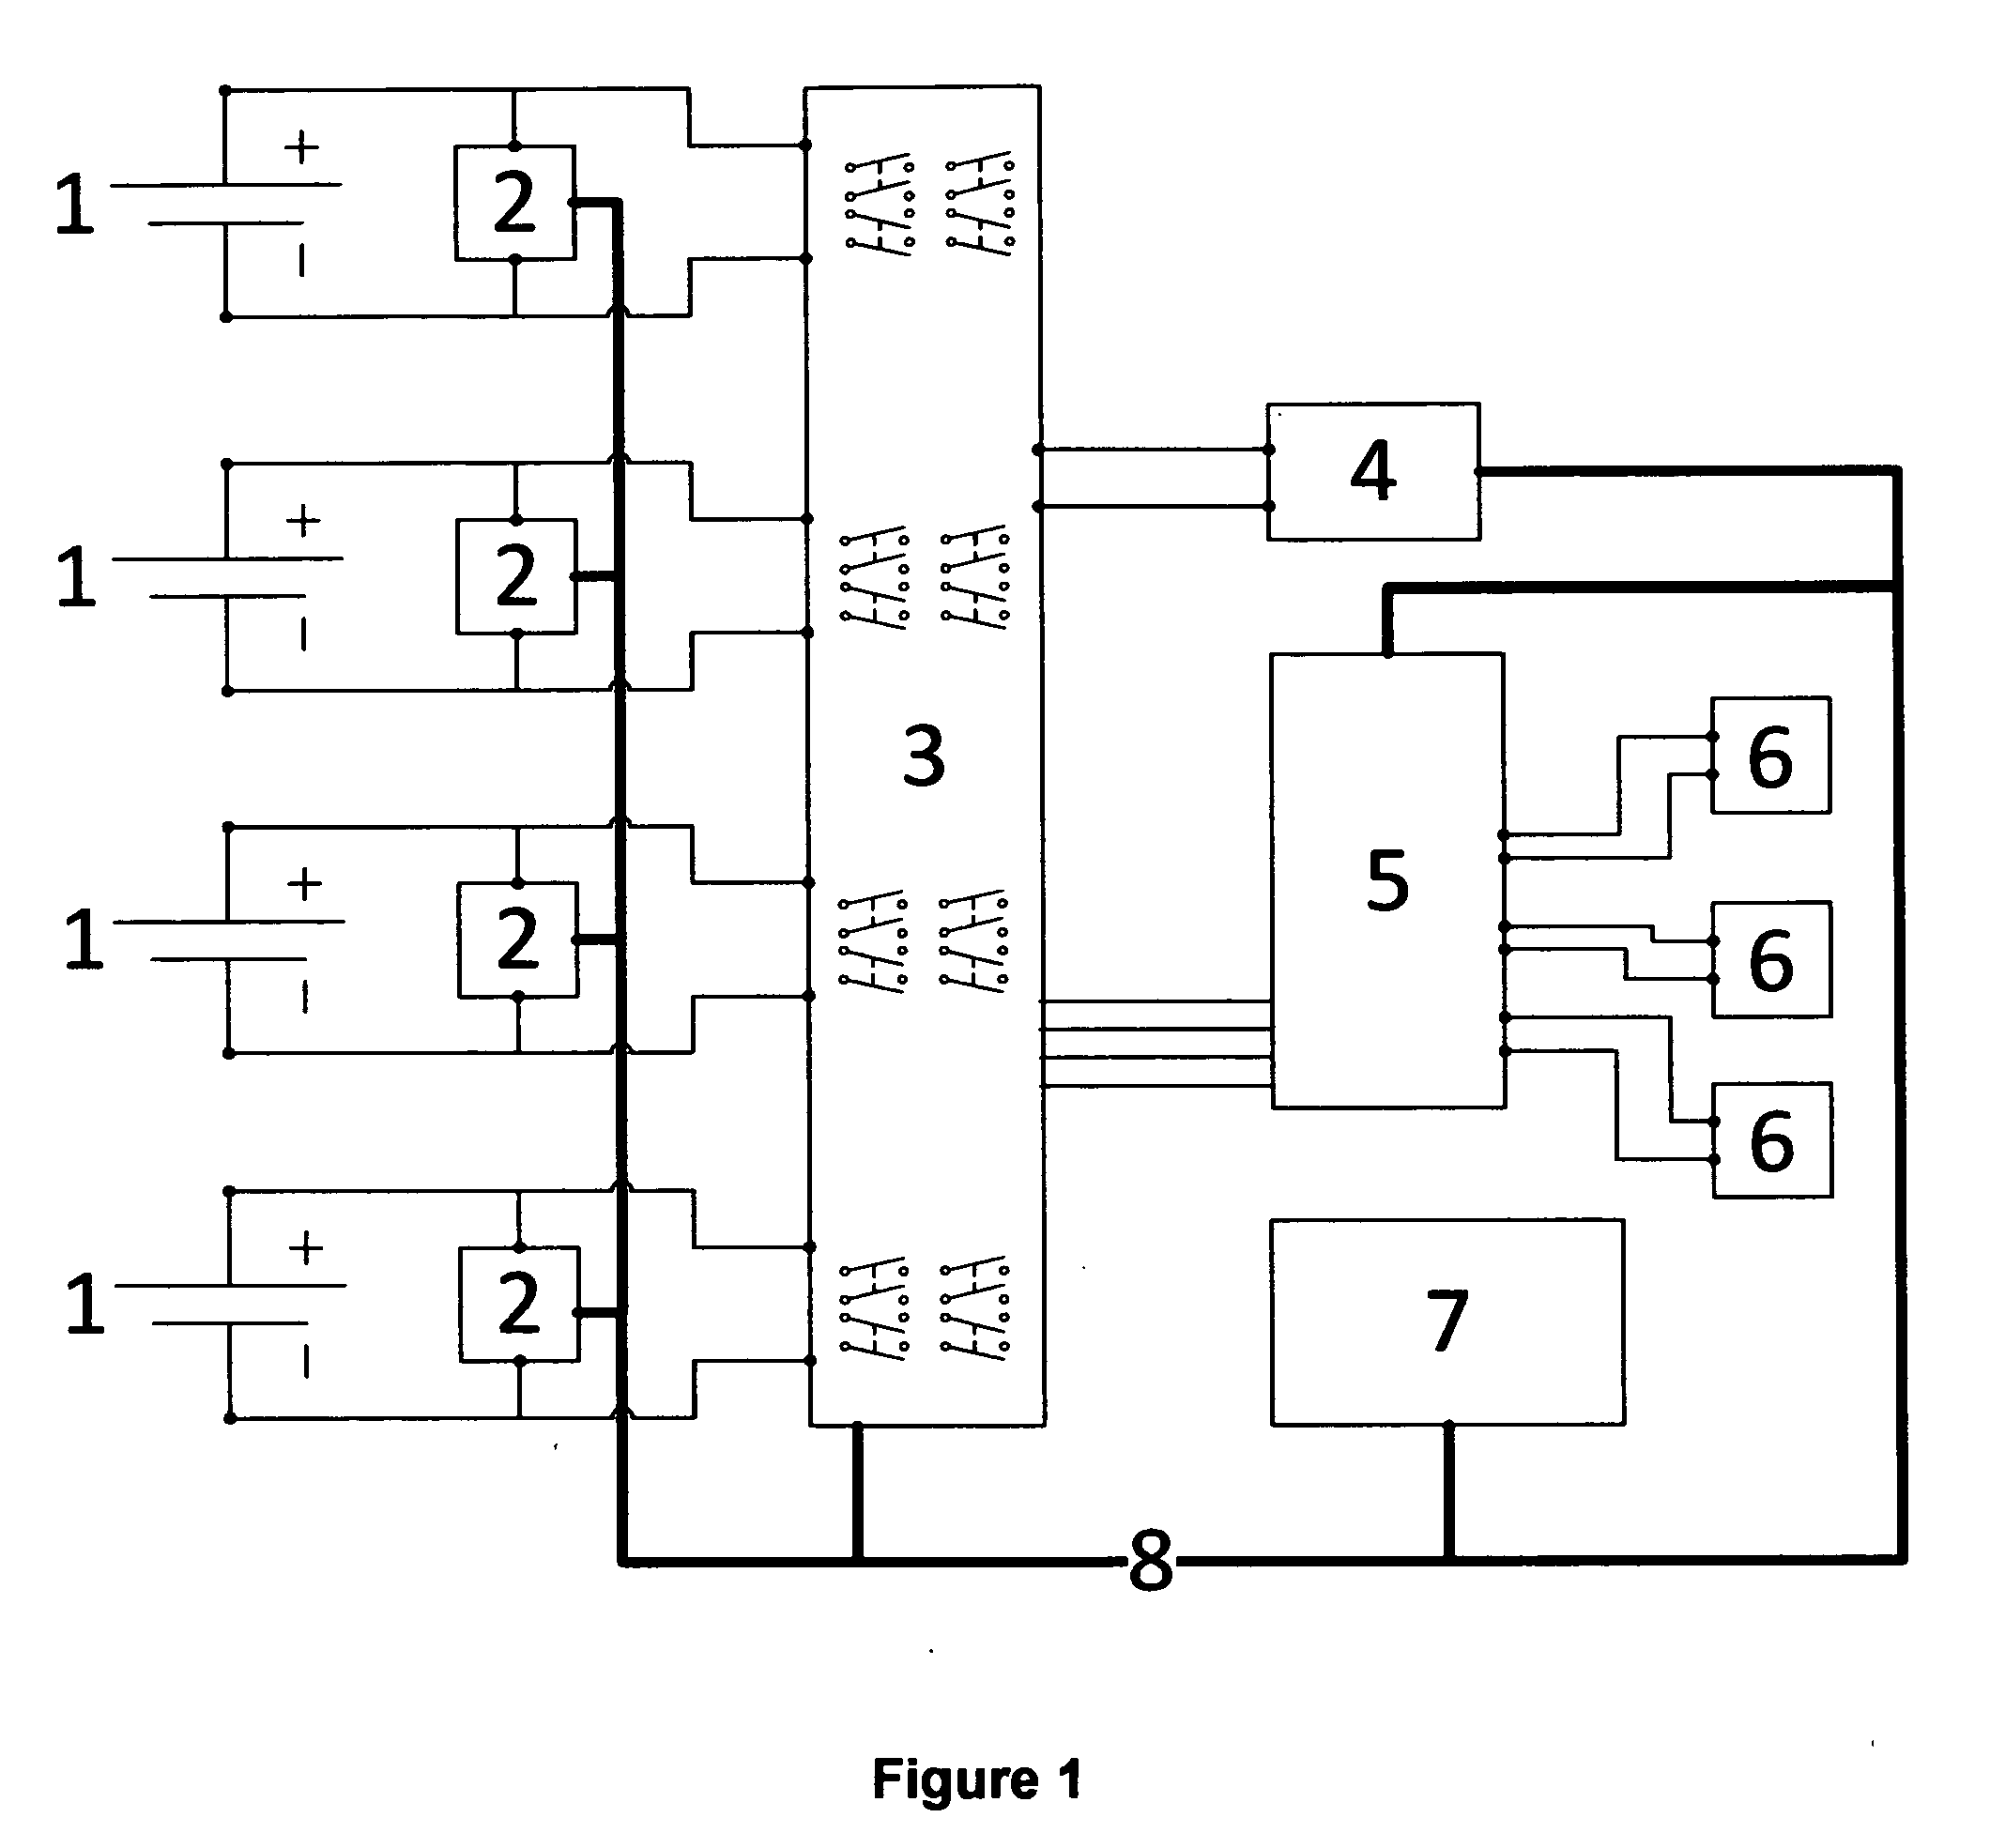 System and method for power management of energy storage devices